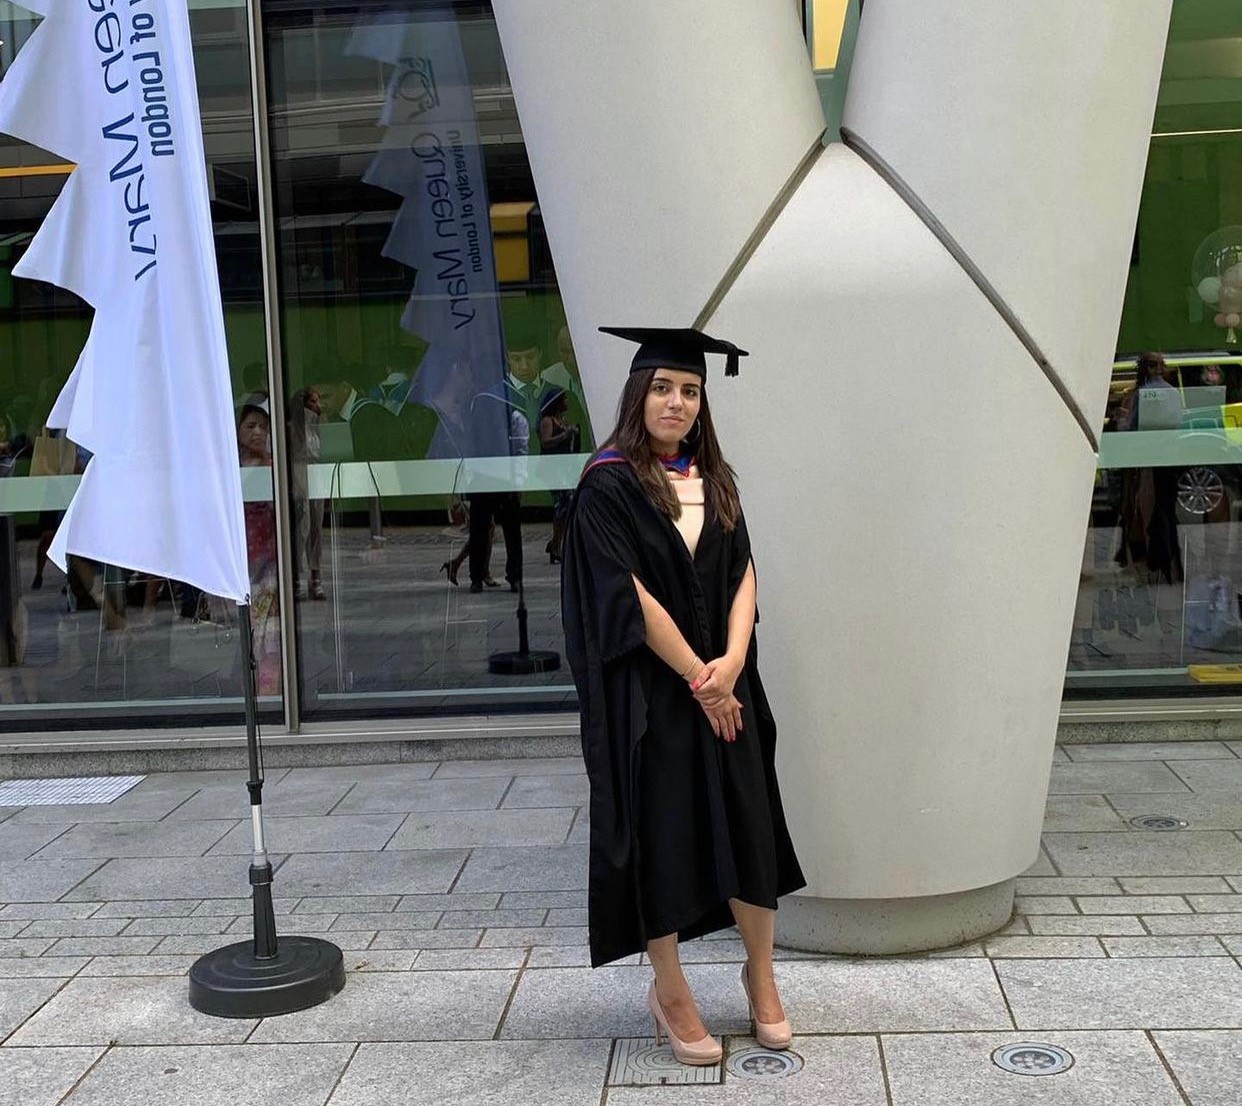 Alumna Amandeep Kaur Gill on her graduation day dressed in her cap and gown.